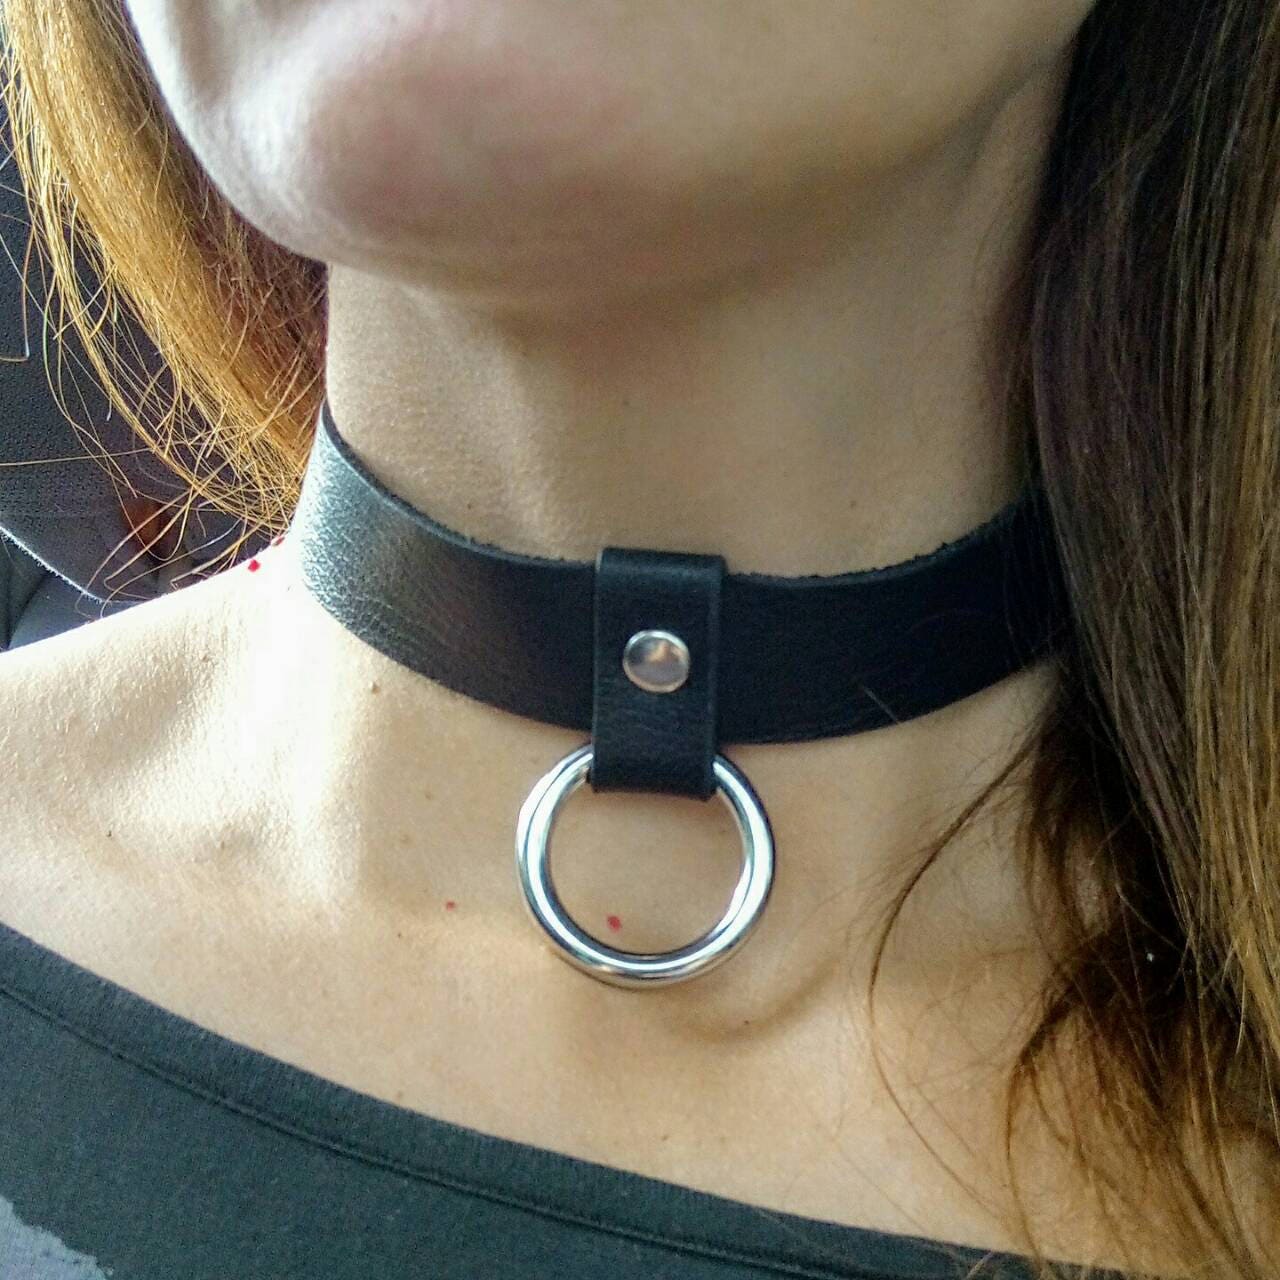 Studded Black Choker Necklace, Silver Studded Leather Choker, Black Leather Chokers  for Women Teens and Girls, Unisex Jewelry 